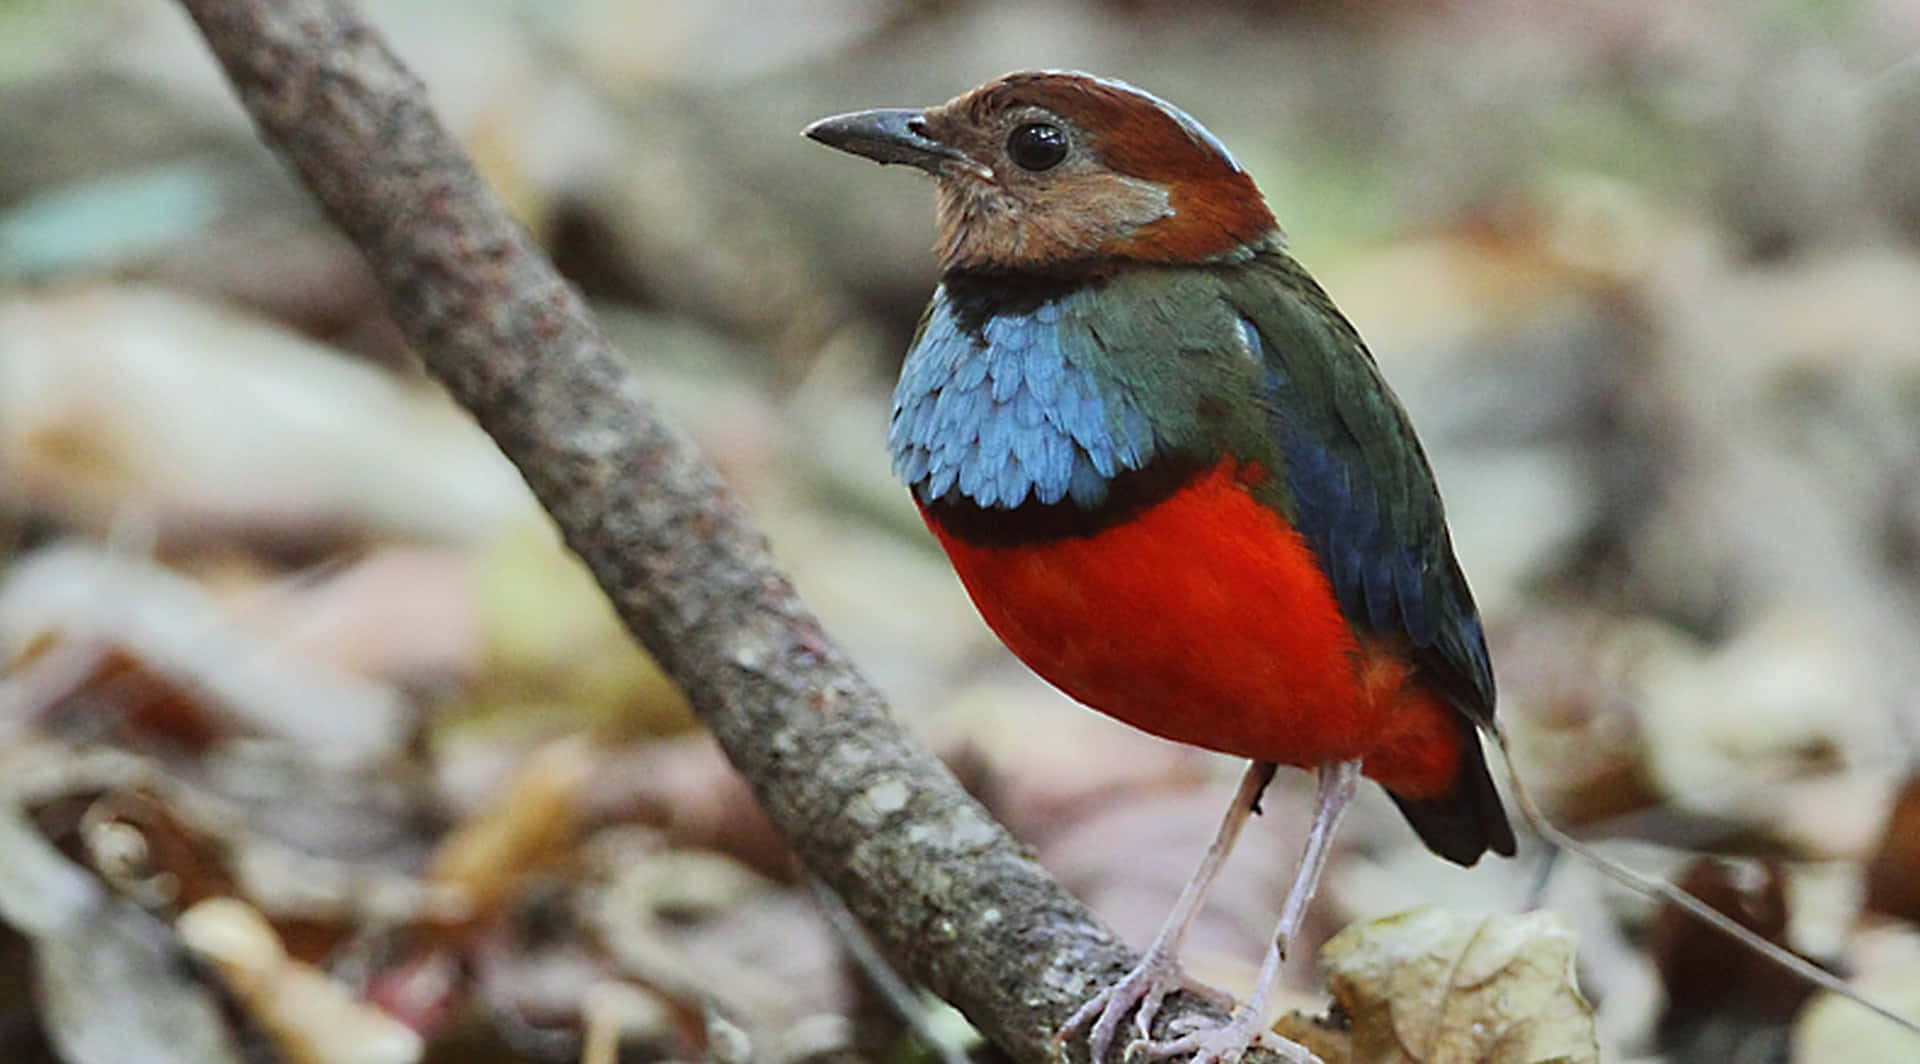 Sulawesi Pitta Bird's Colorful Feathers Wallpaper